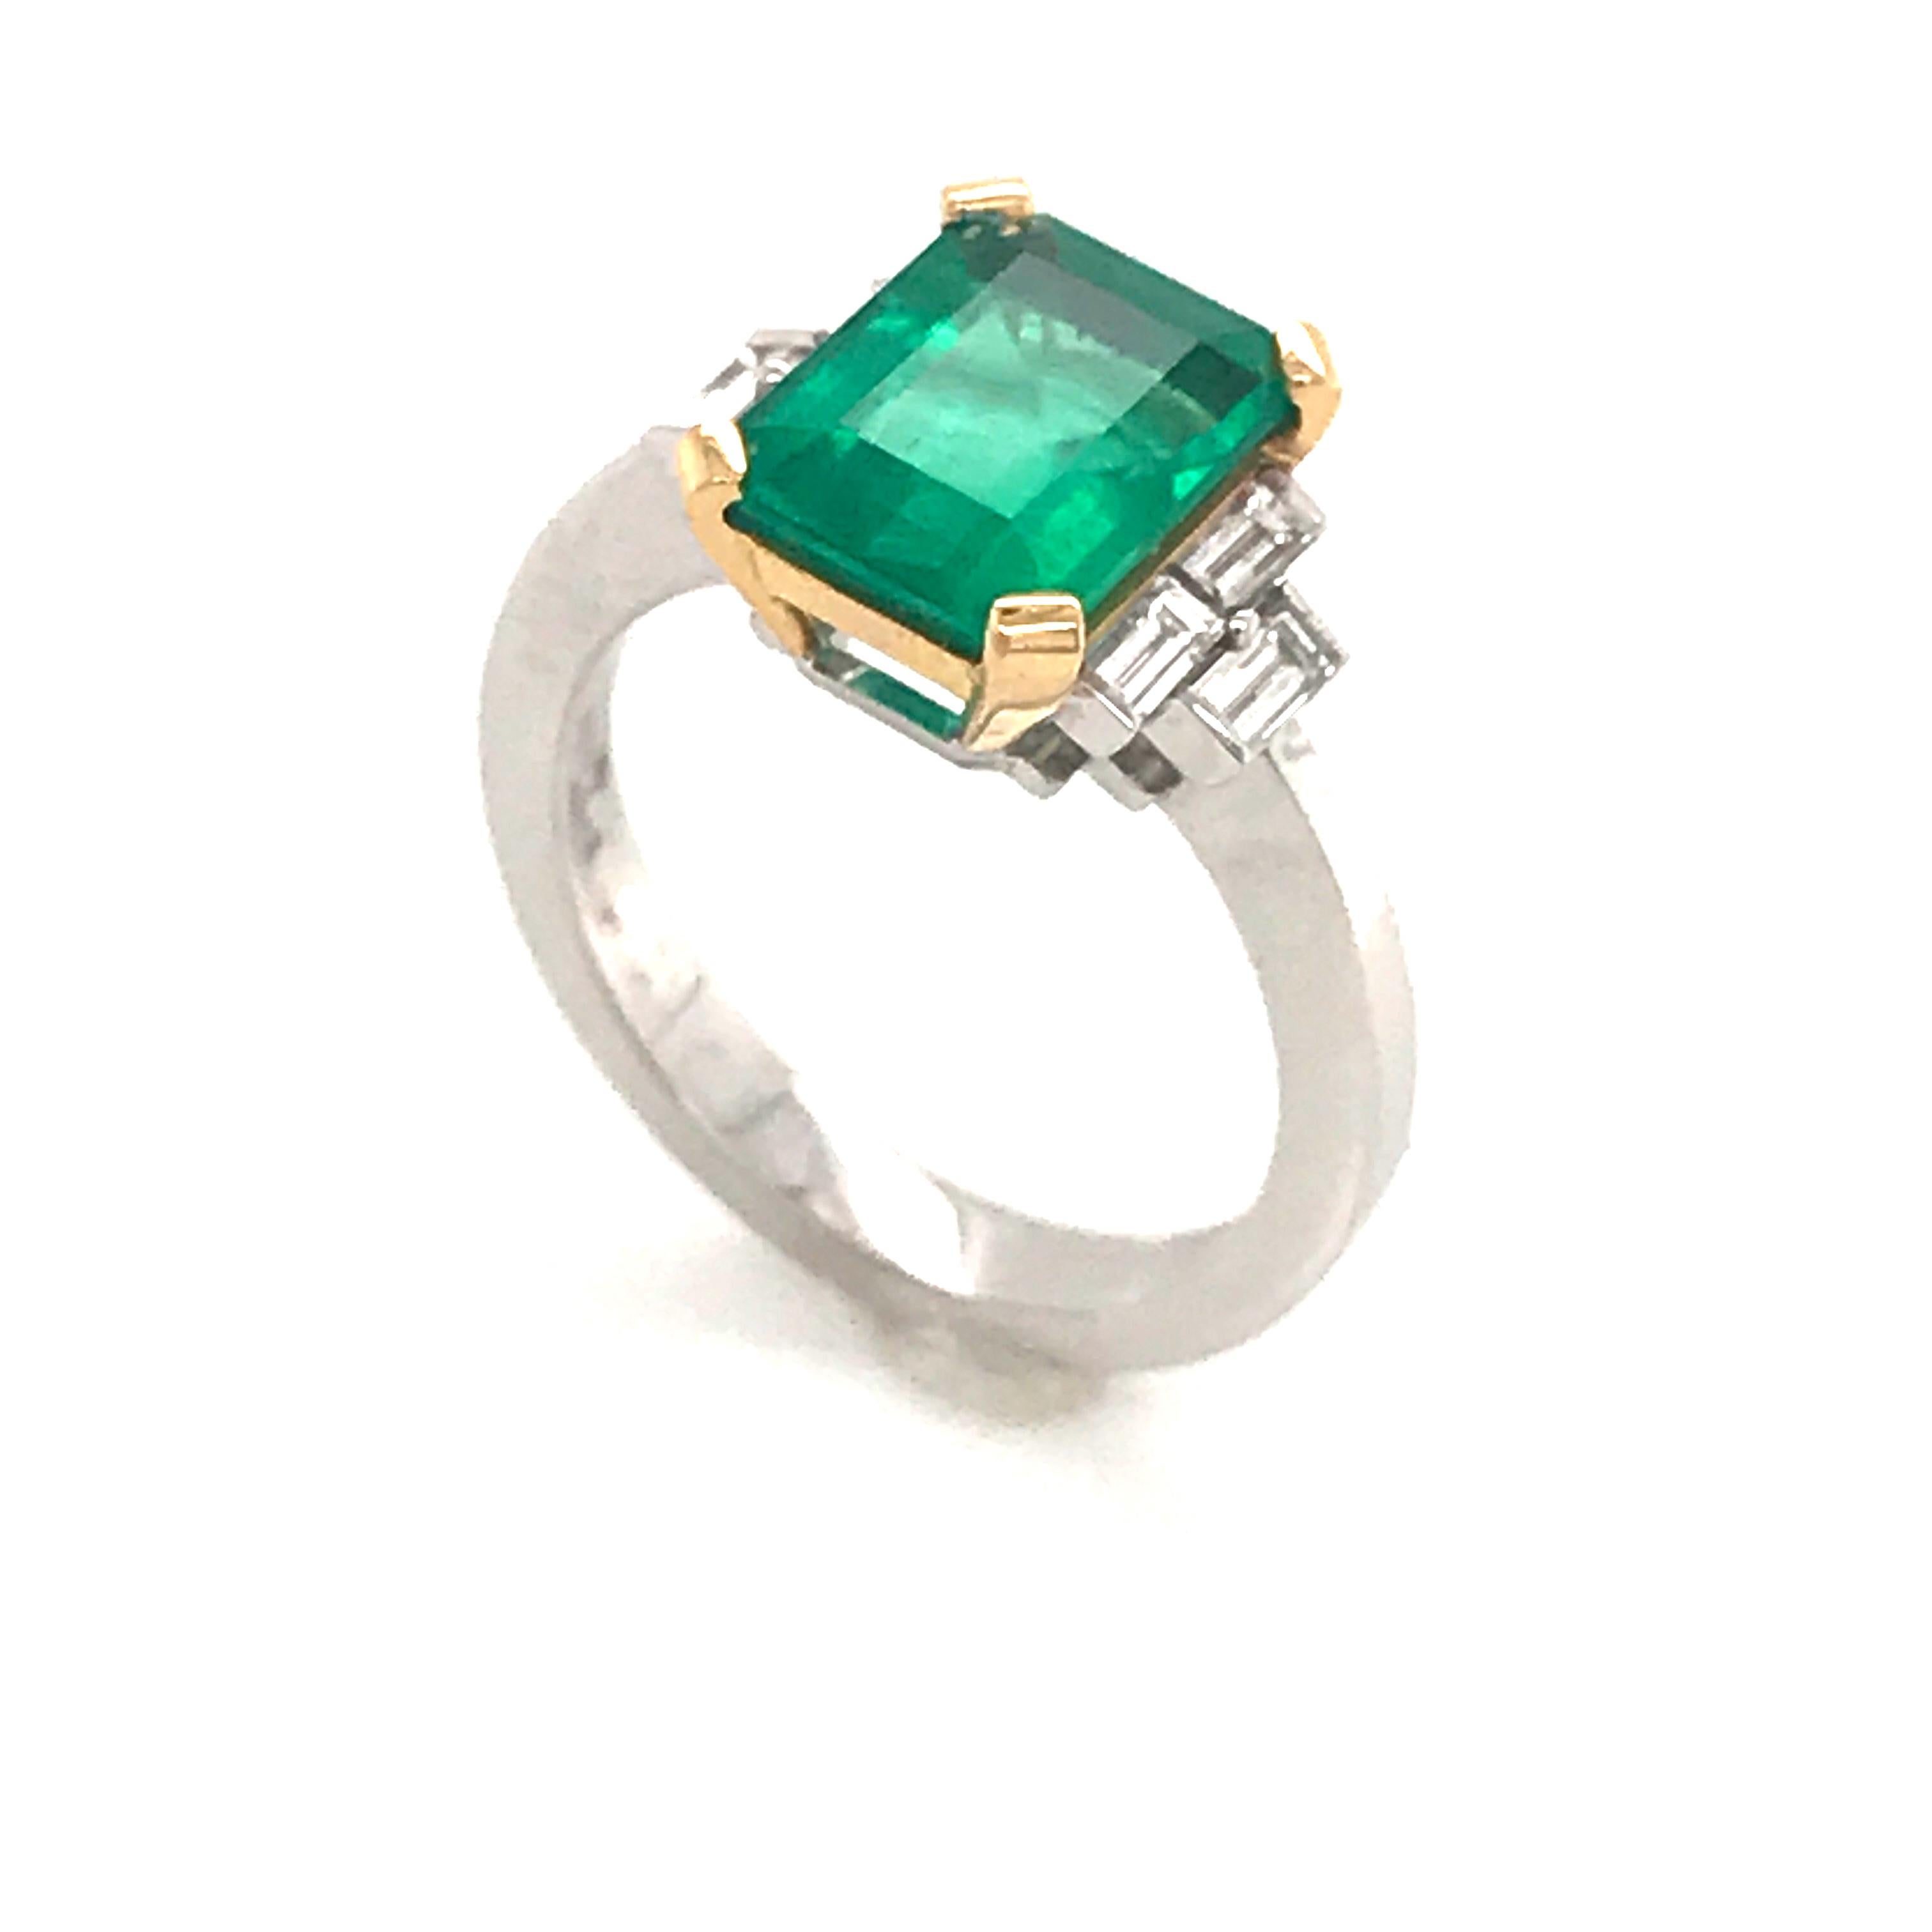 Certified Emerald 2.68 Karat White Diamonds on with Gold Engagement Ring 6